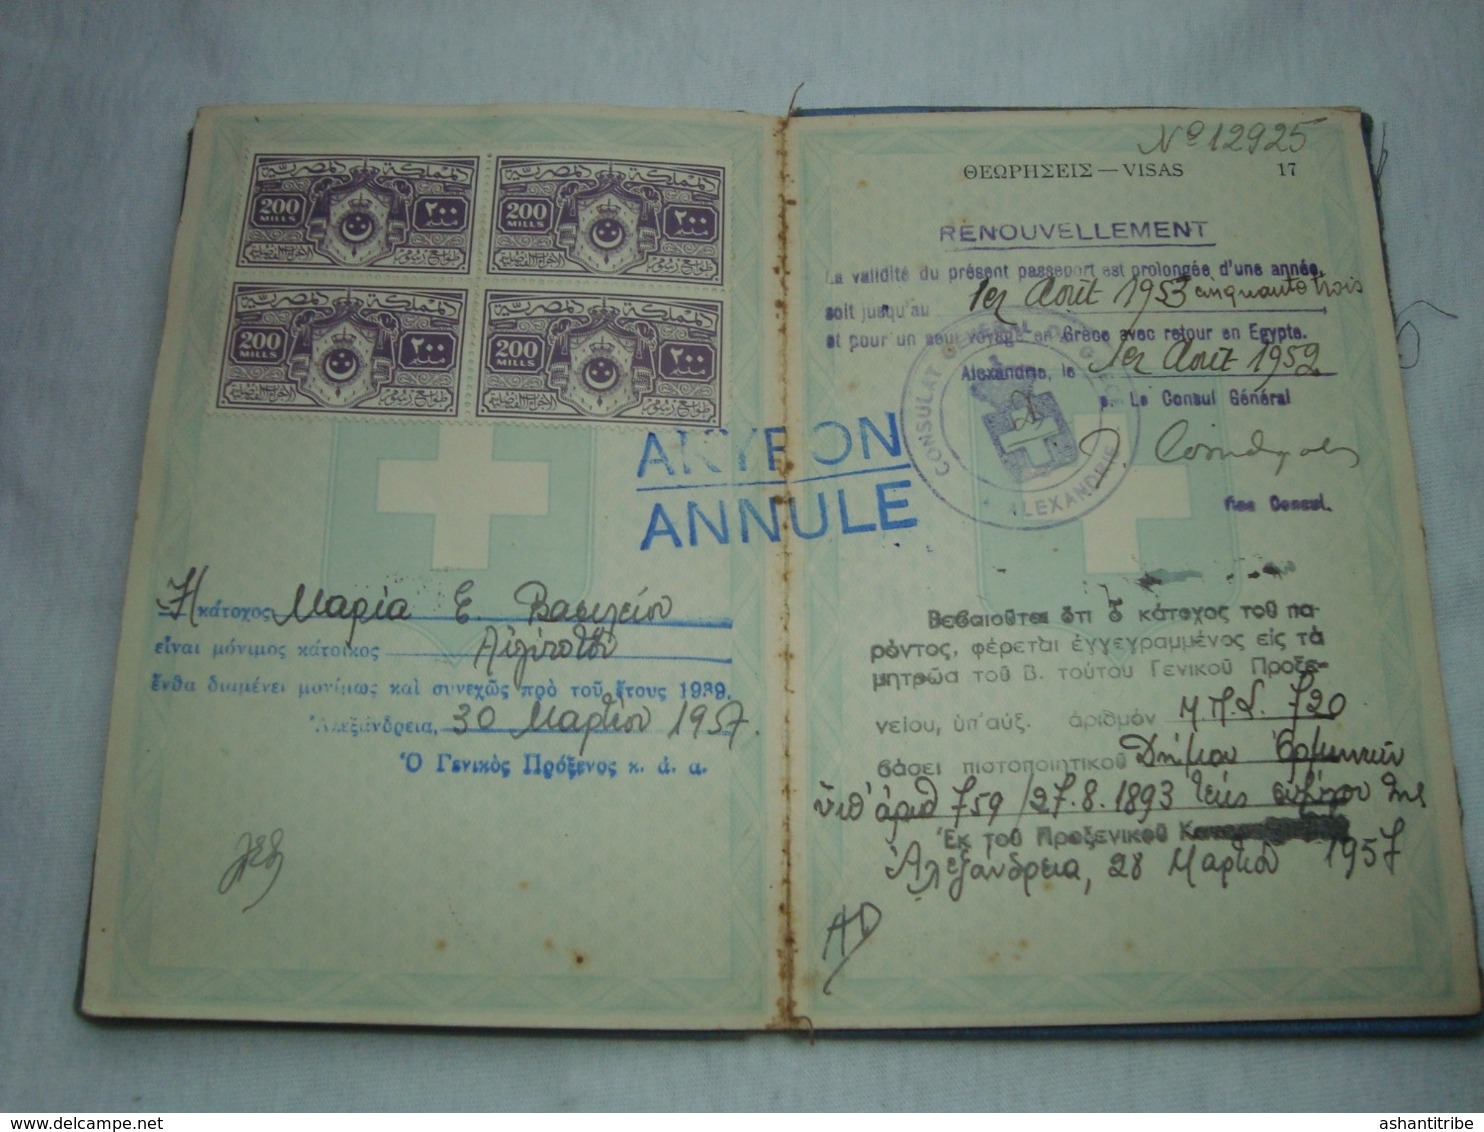 Greece passport reisepass passeport 1934 with many interesting revenues and ink stamps